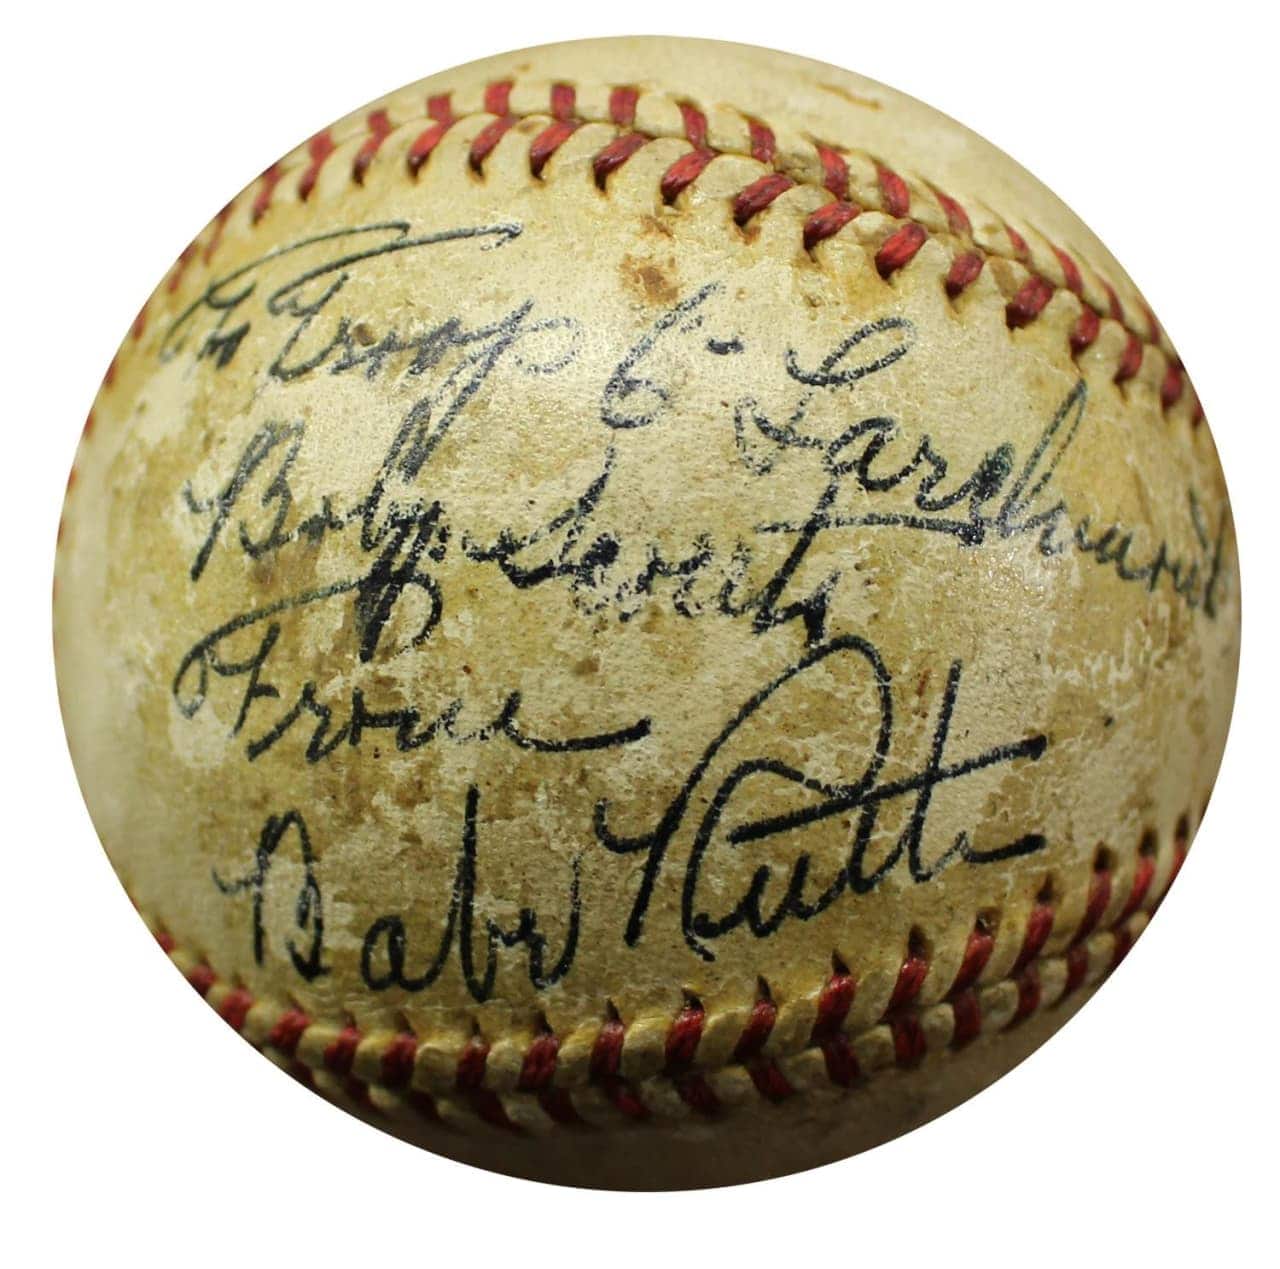 A baseball signed by Babe Ruth is being auctioned to benefit the Westchester-Putnam Boy Scouts.